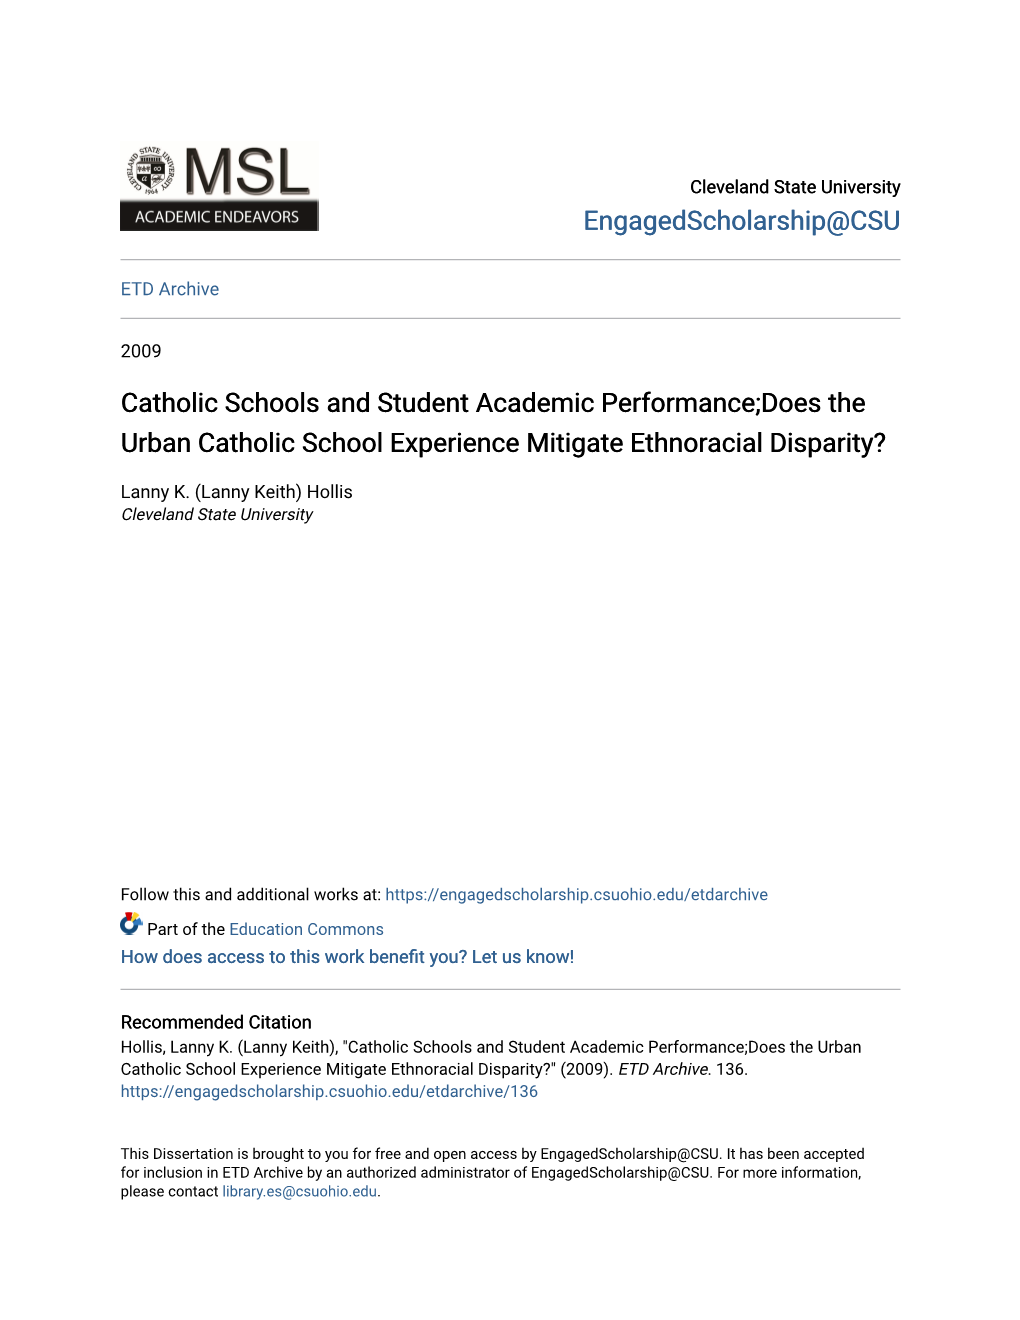 Catholic Schools and Student Academic Performance;Does the Urban Catholic School Experience Mitigate Ethnoracial Disparity?